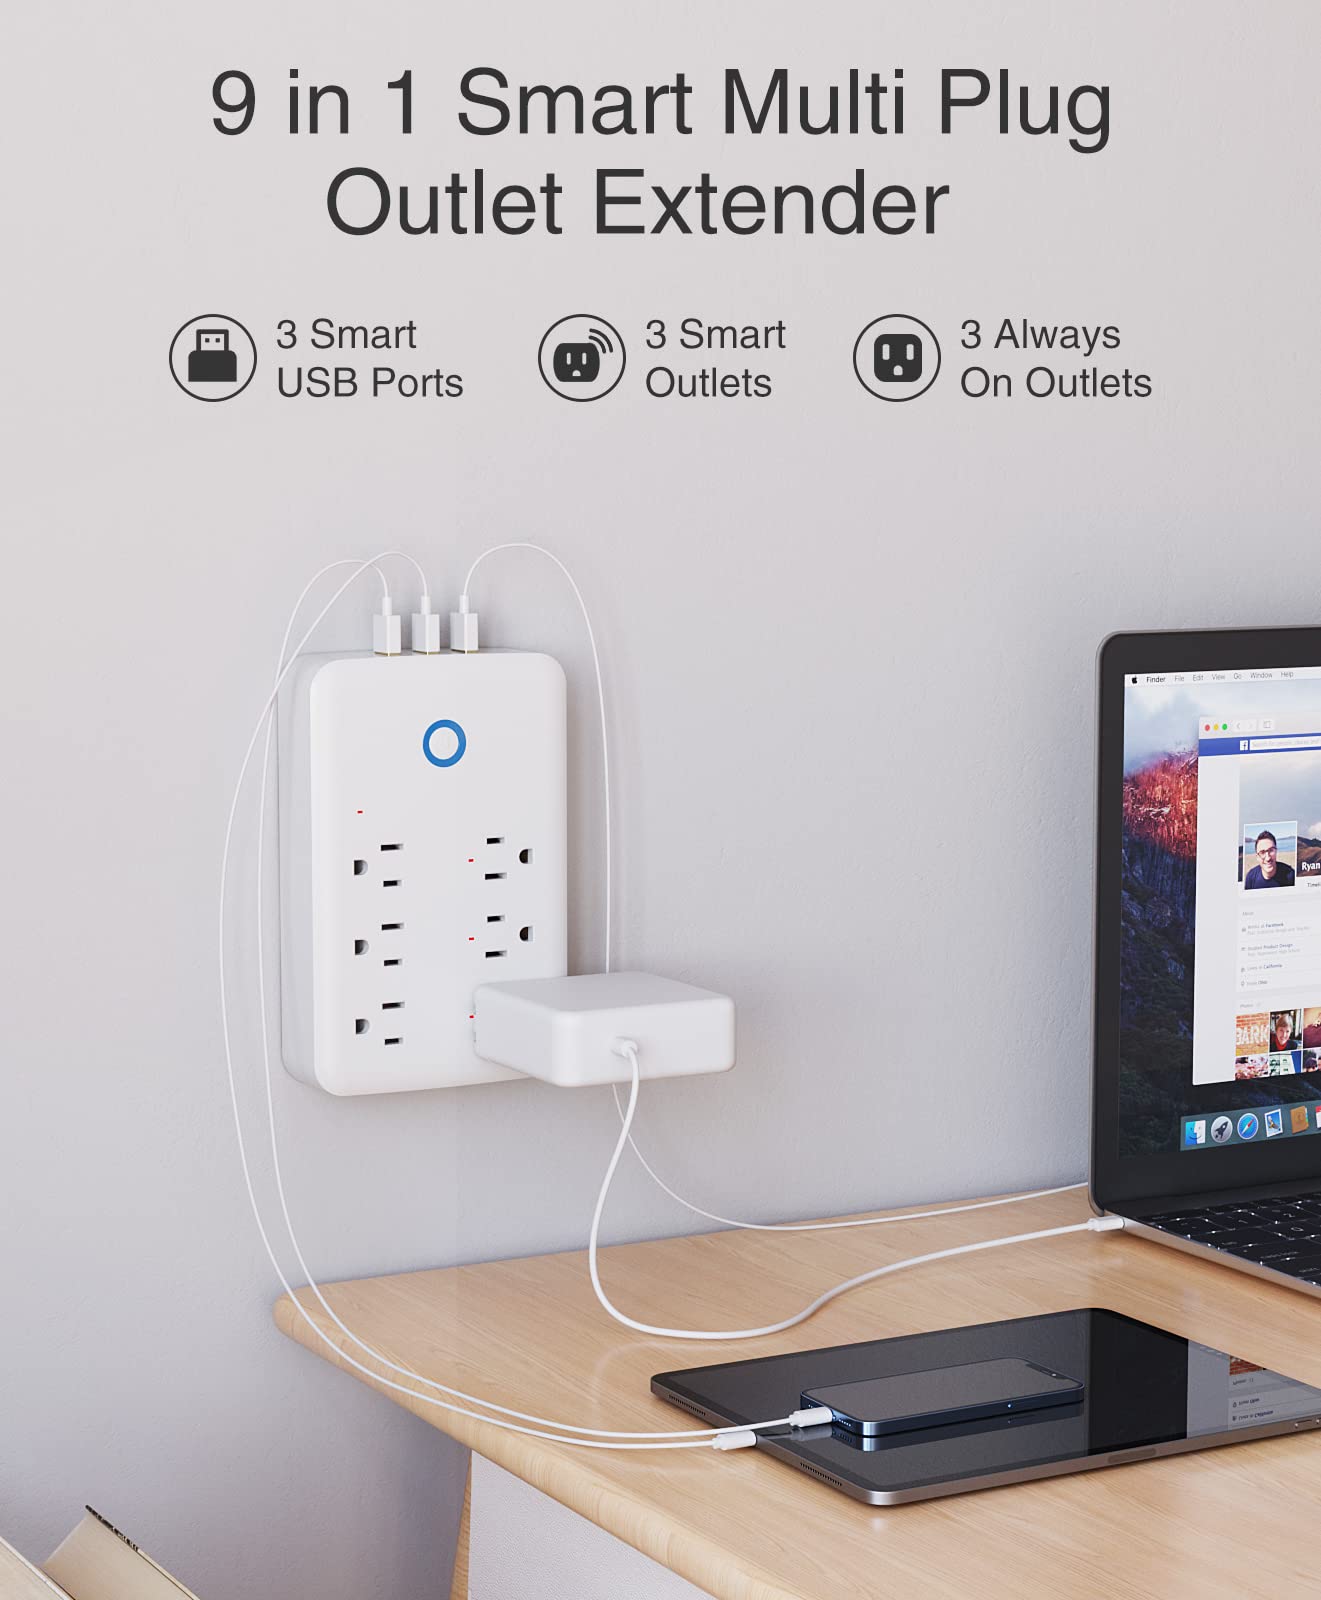 Smart Plug Outlet Extender, WiFi Surge Protector Work with Alexa Google Home, 3USB Ports and 6 Outlets, Wall Adapter Power Strip Plug Receptacles, 2.4G Wi-Fi Only, 15A/1800W